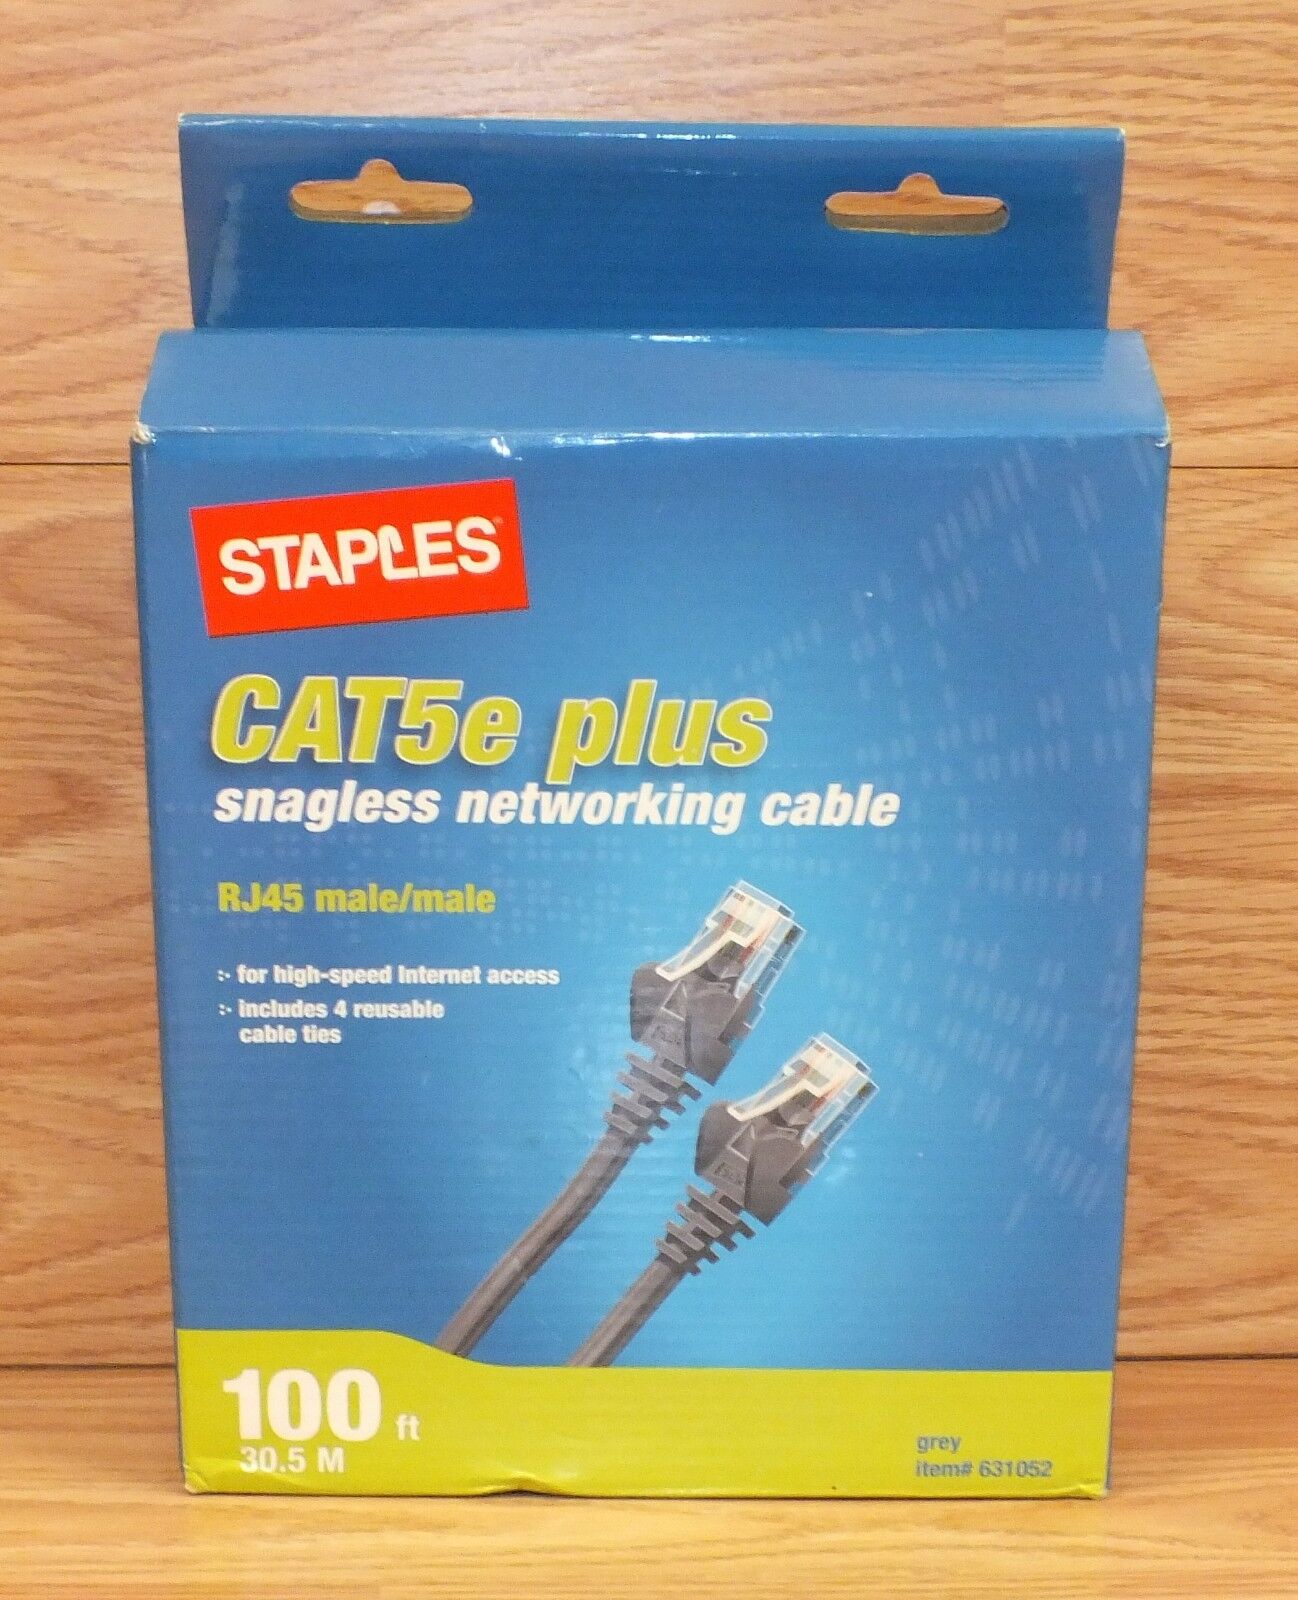 Staples (RJ45) Male / Male 100ft 30.5m CAT5e Plus Snagless Networking Cable 